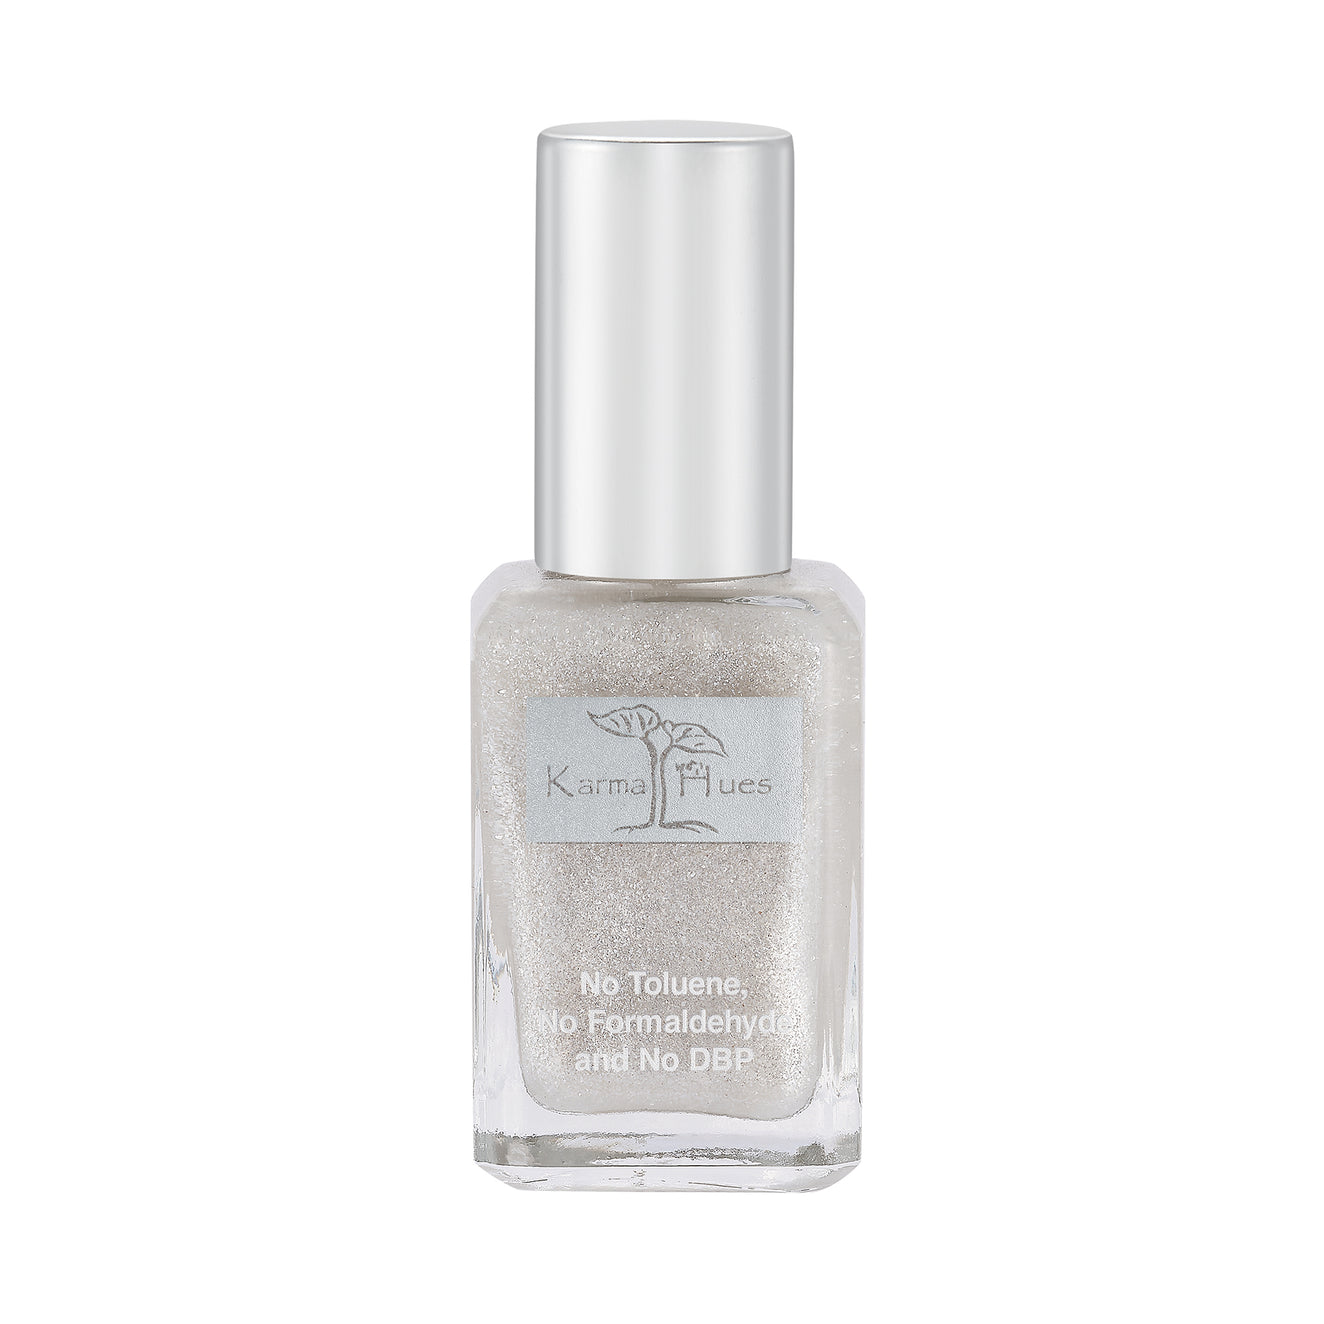 Lul Shmmer - Nail Polish; Non-Toxic, Vegan, and Cruelty-Free (#556)